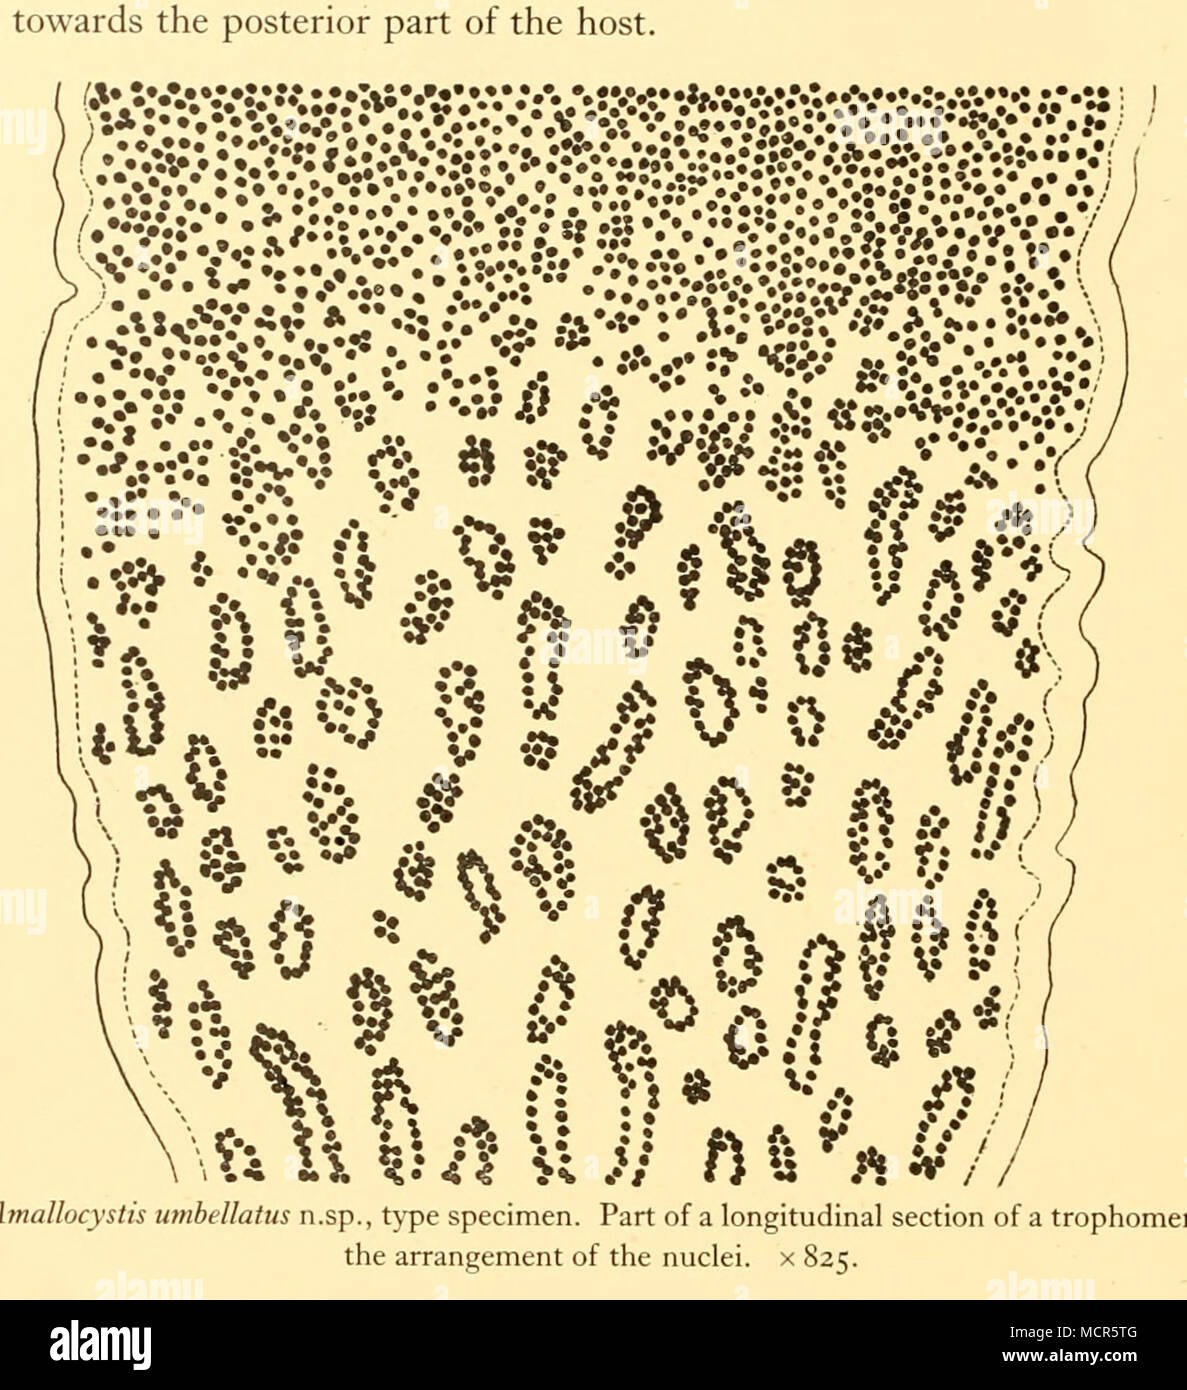 . Fig. 10. Amallocystis umbi lomere, showing No Studies were made of cytological details of the parasite. A few remarks on the trophomeres and the gonomeres may be given here. In the stained sections the trophomeres have a pink colour, the younger gonomeres may have the same colour or may have become a slightly darker red. The older gonomeres are stained much more deeply, and often show a dark blue colour. In the gonomeres the nuclei appear to be more or less evenly distributed throughout the whole organ. In the tropho- meres, however, there is a distinct difference between the proximal part a Stock Photo